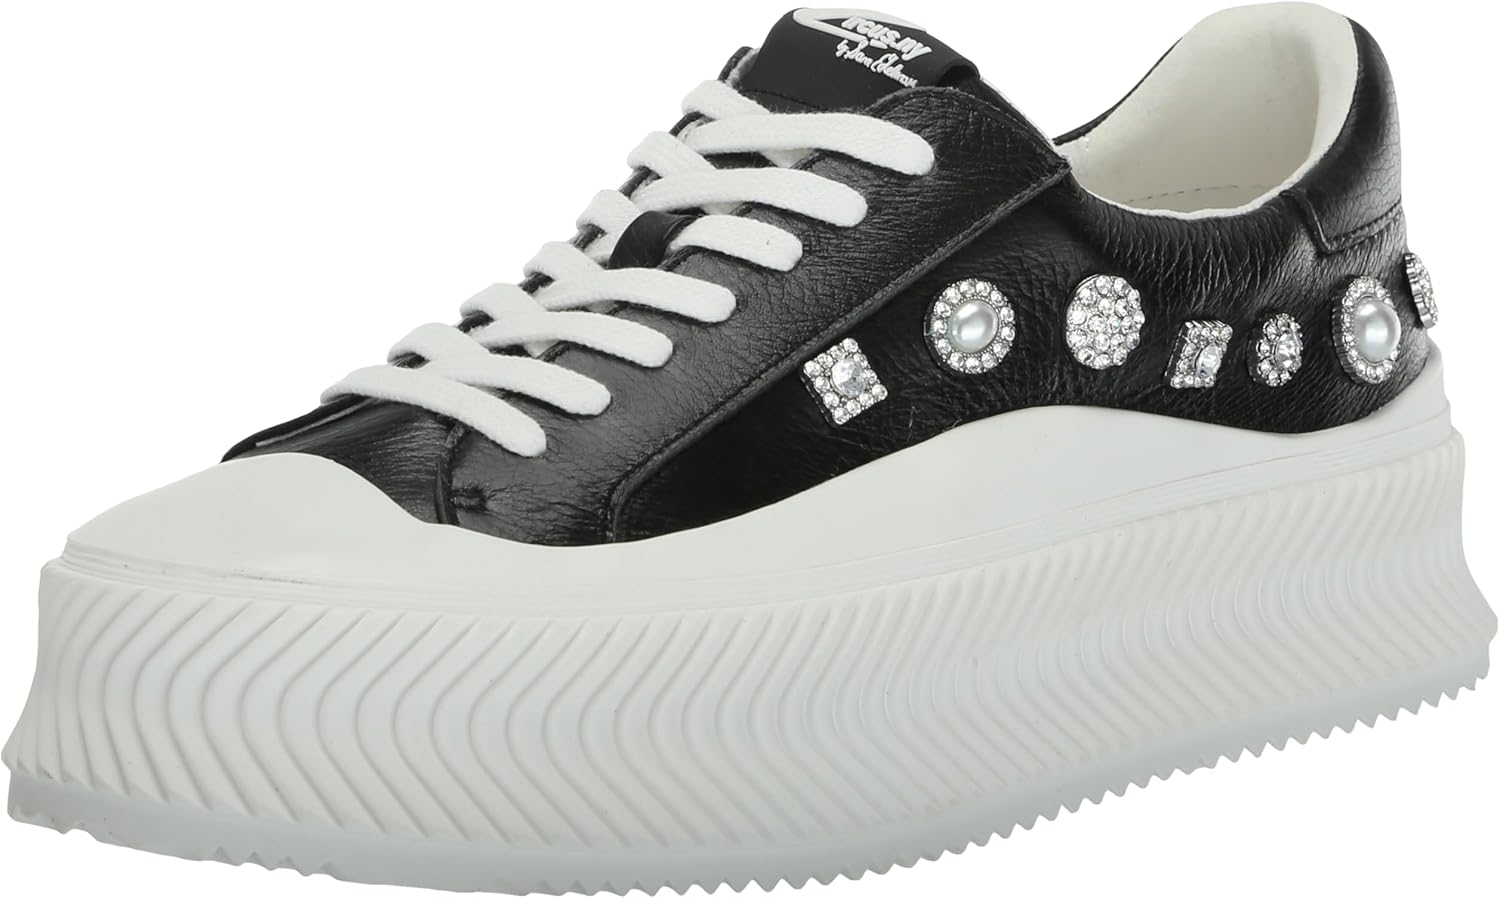 Circus NY by Sam Edelman Women's Taelyn Sneaker